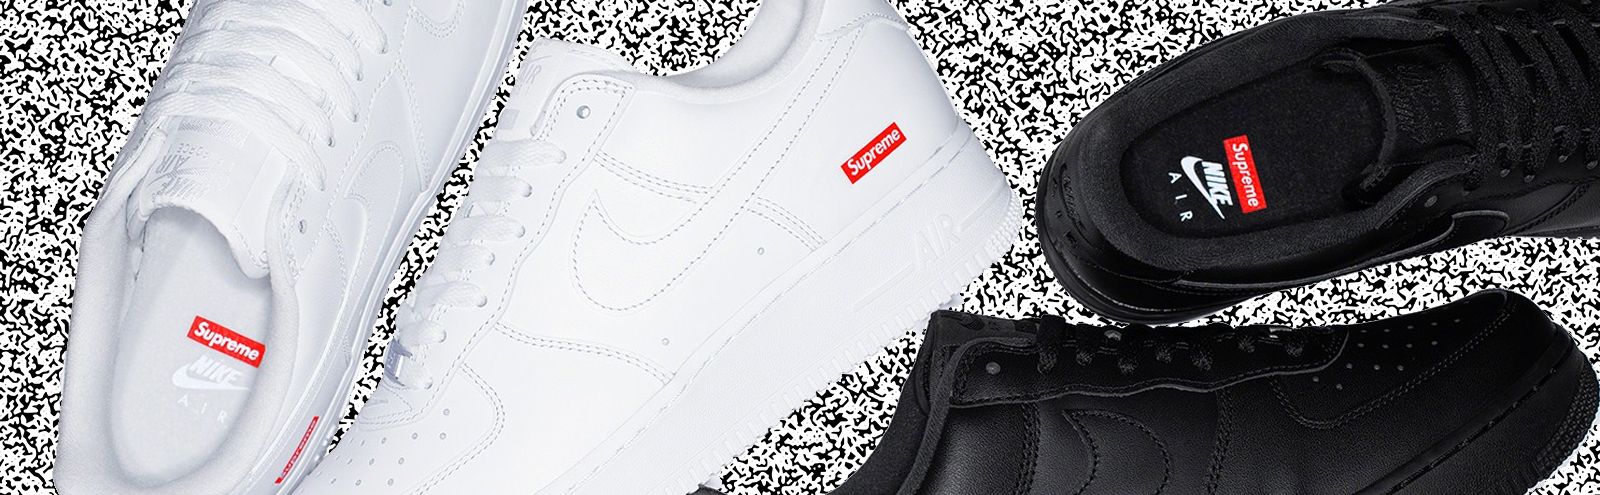 Supreme Announces New Nike Collab Collection